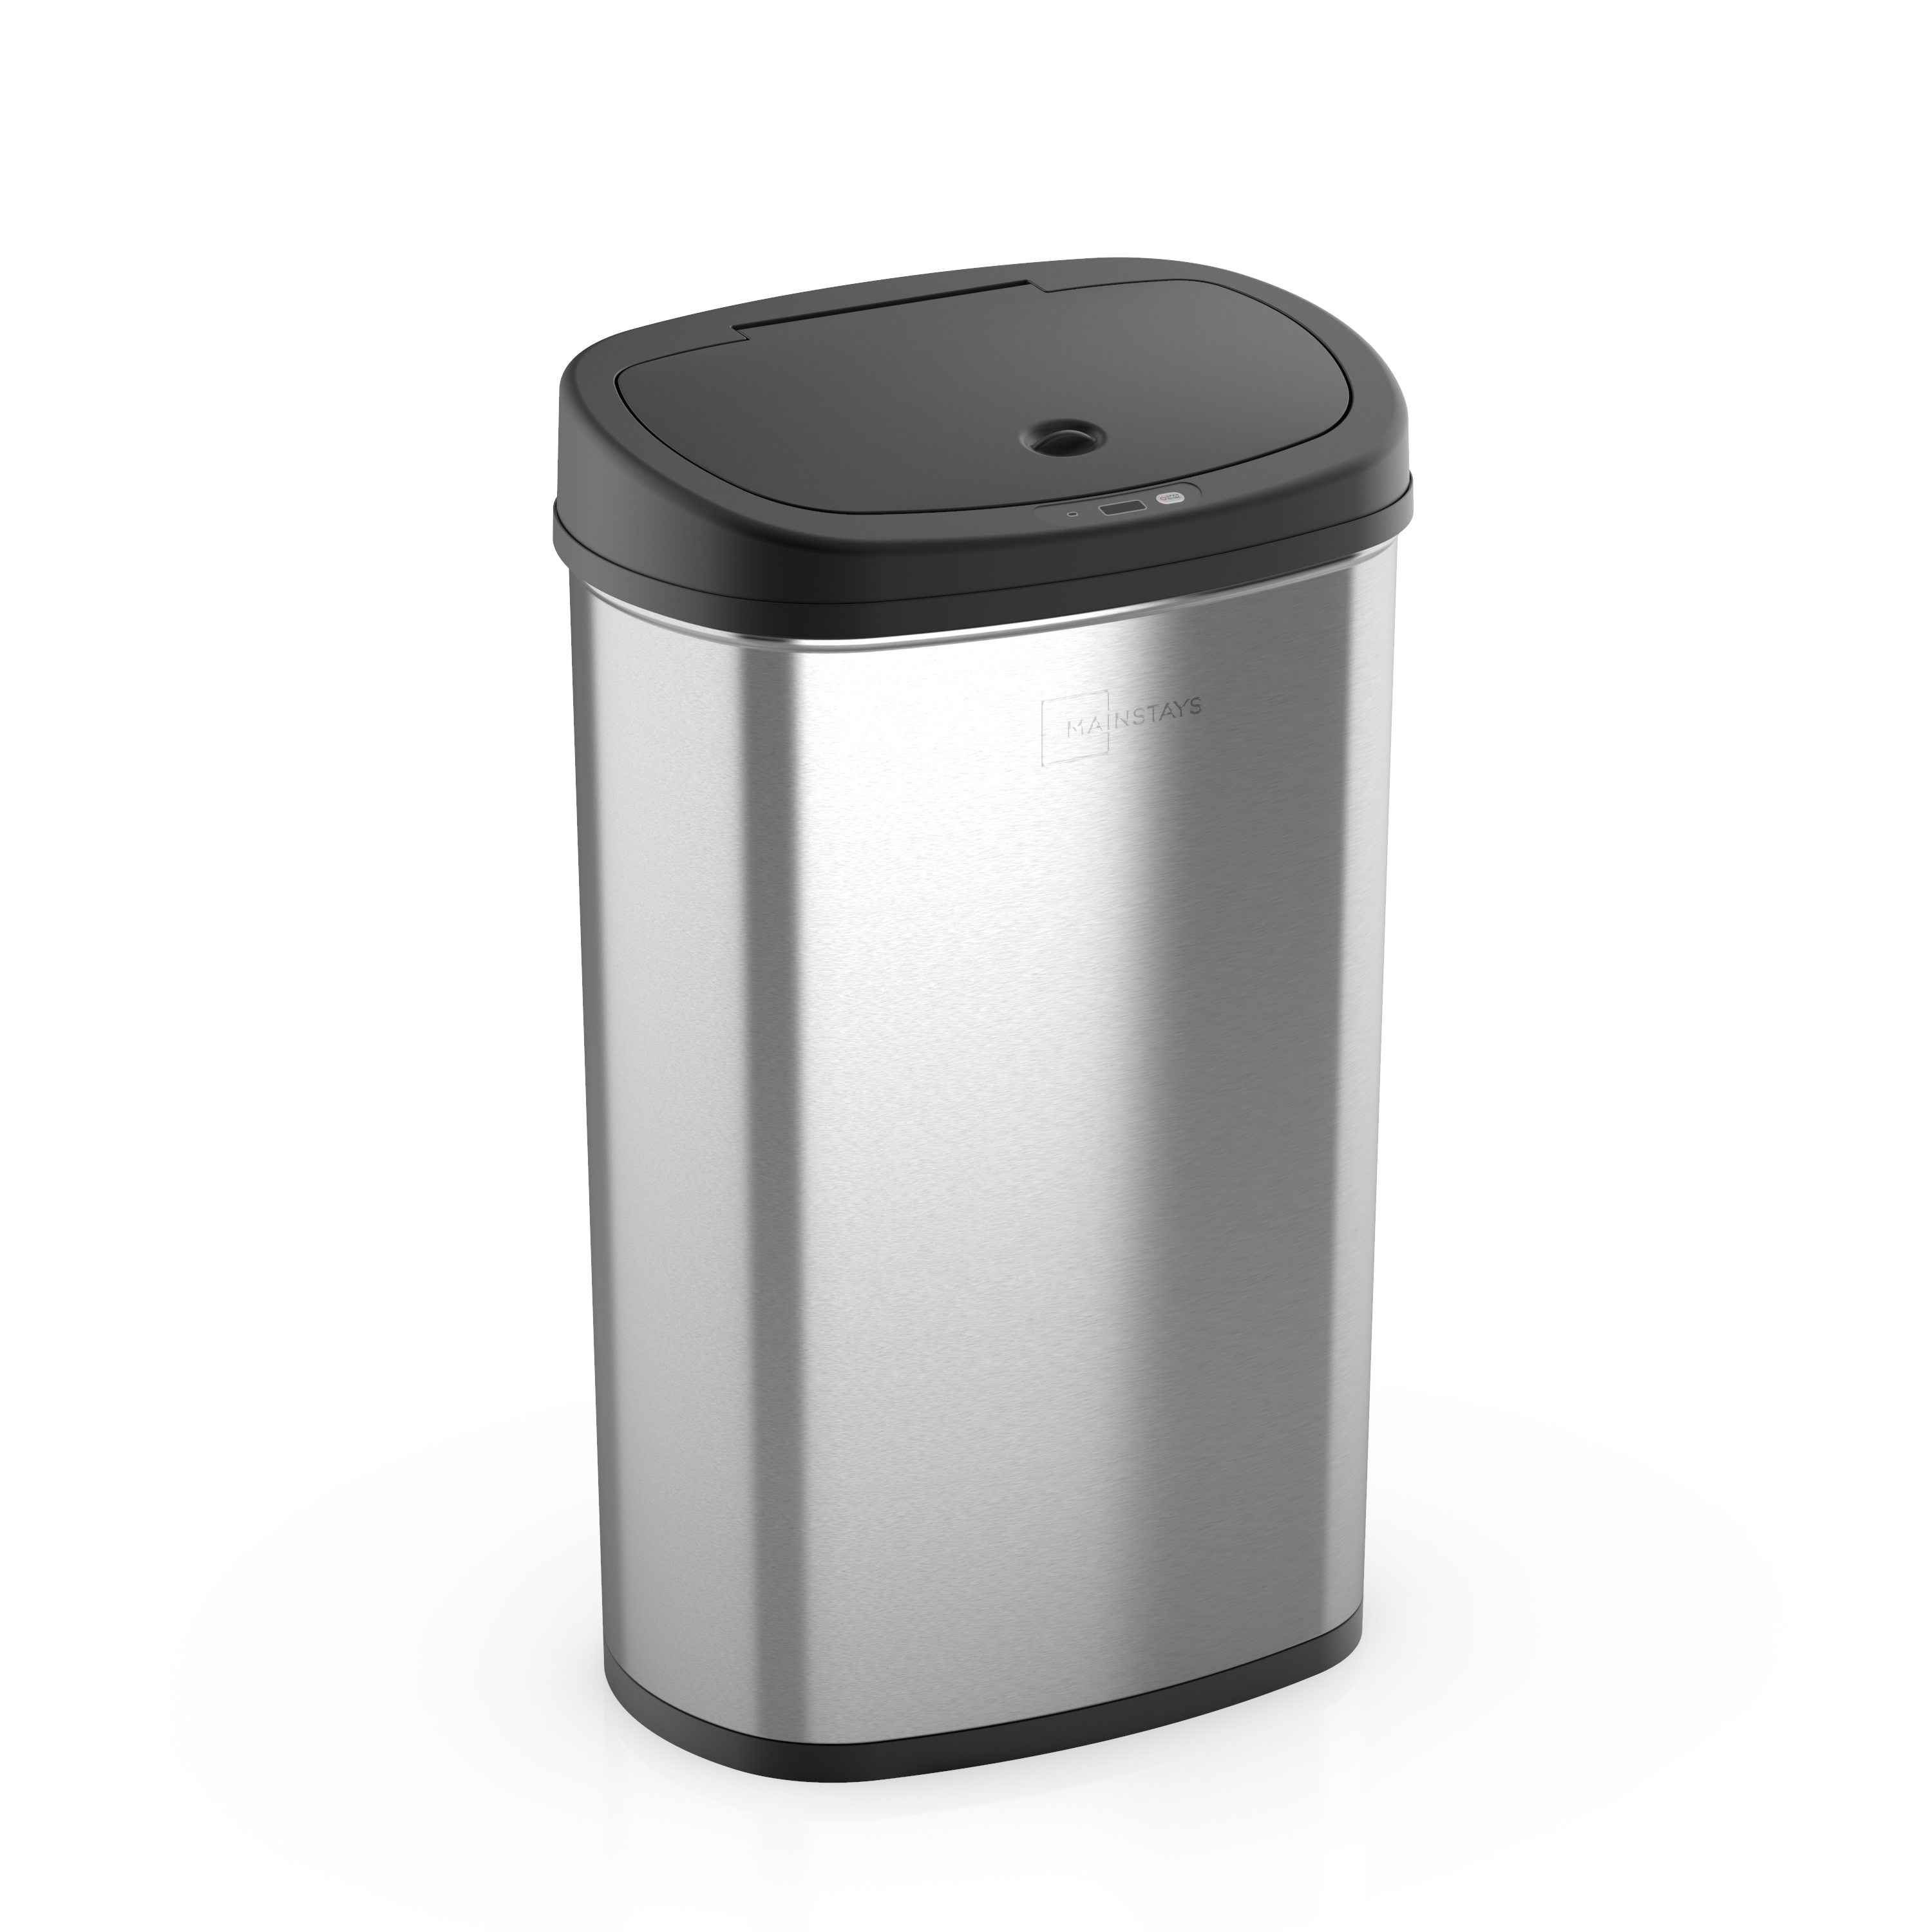 Mainstays 13.2 Gallon Trash Can, Motion Sensor Kitchen Trash Can, Stainless Steel - image 1 of 12